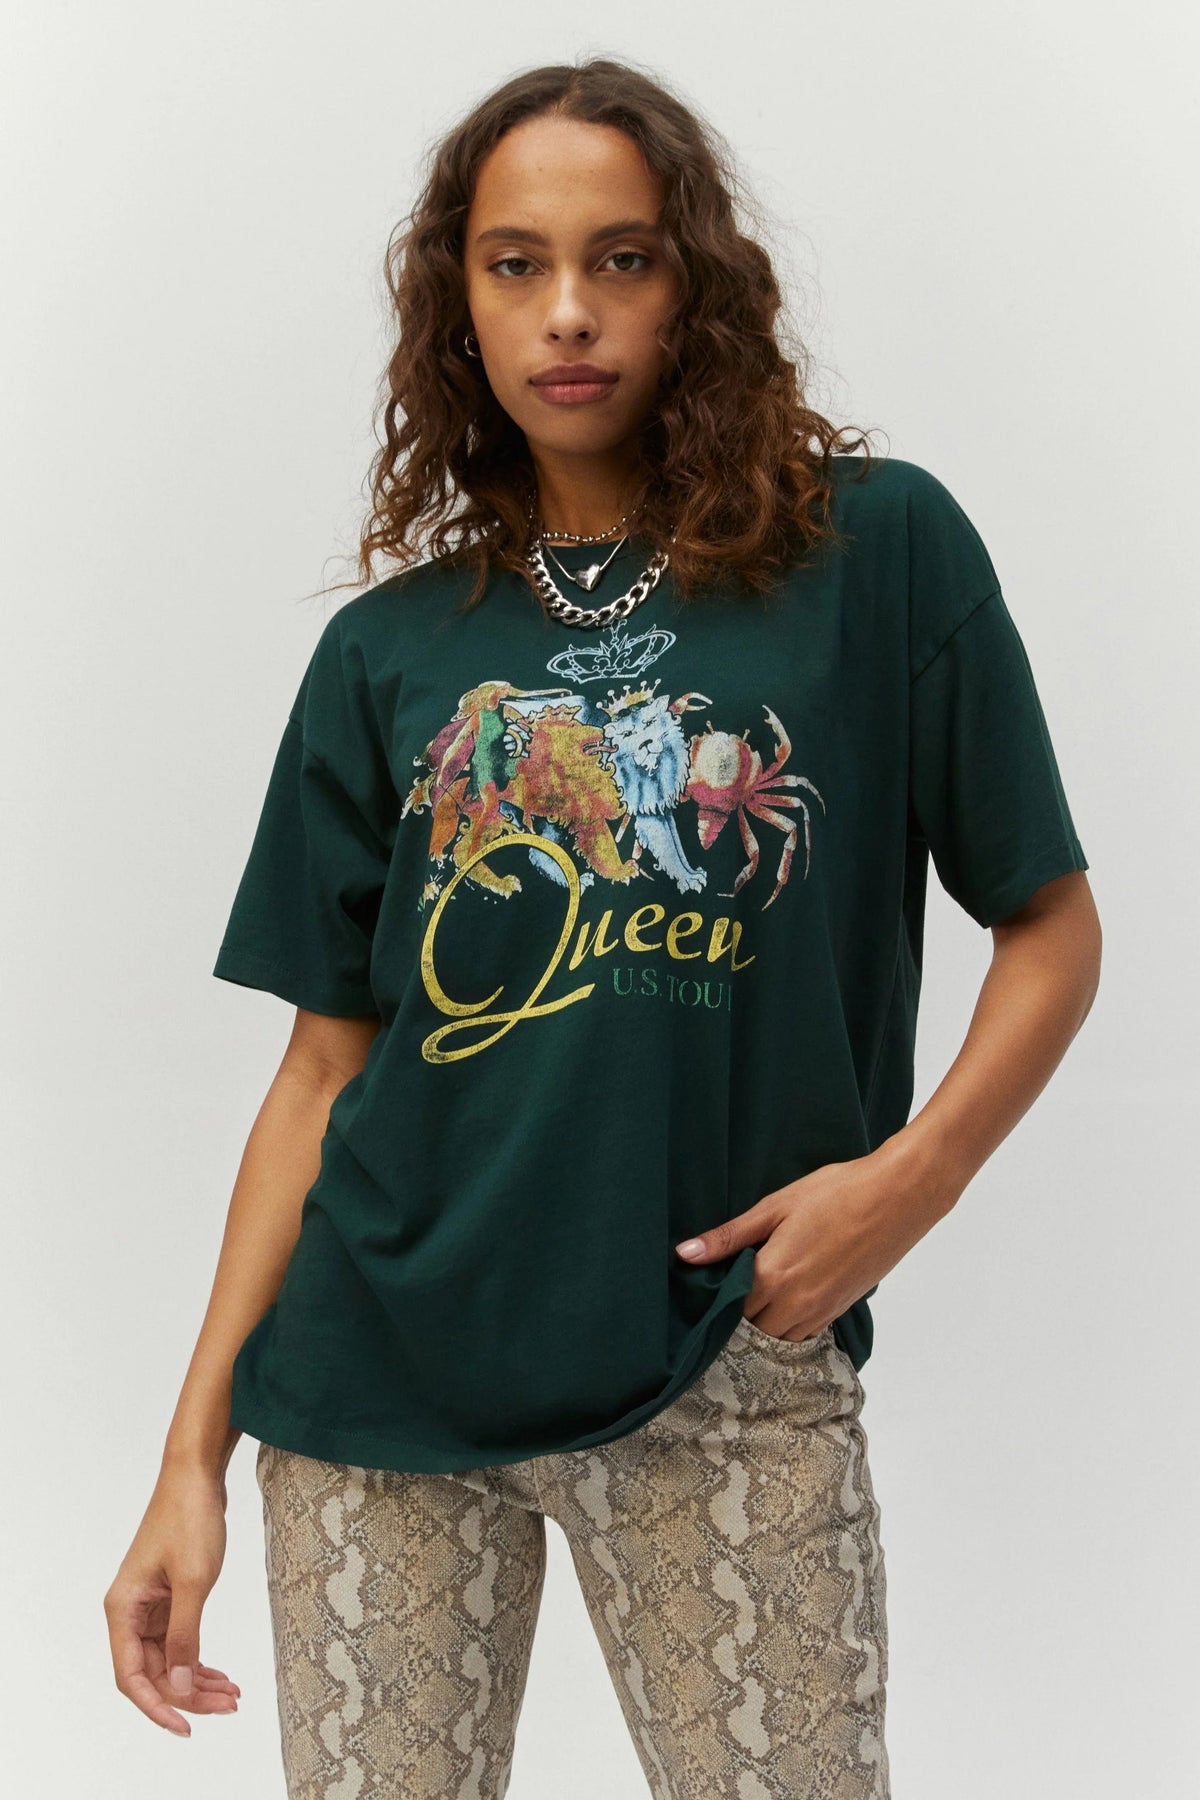 DAYDREAMER Queen US Tour Merch Graphic Tee in Emerald - Graphic Tee - Blooming Daily